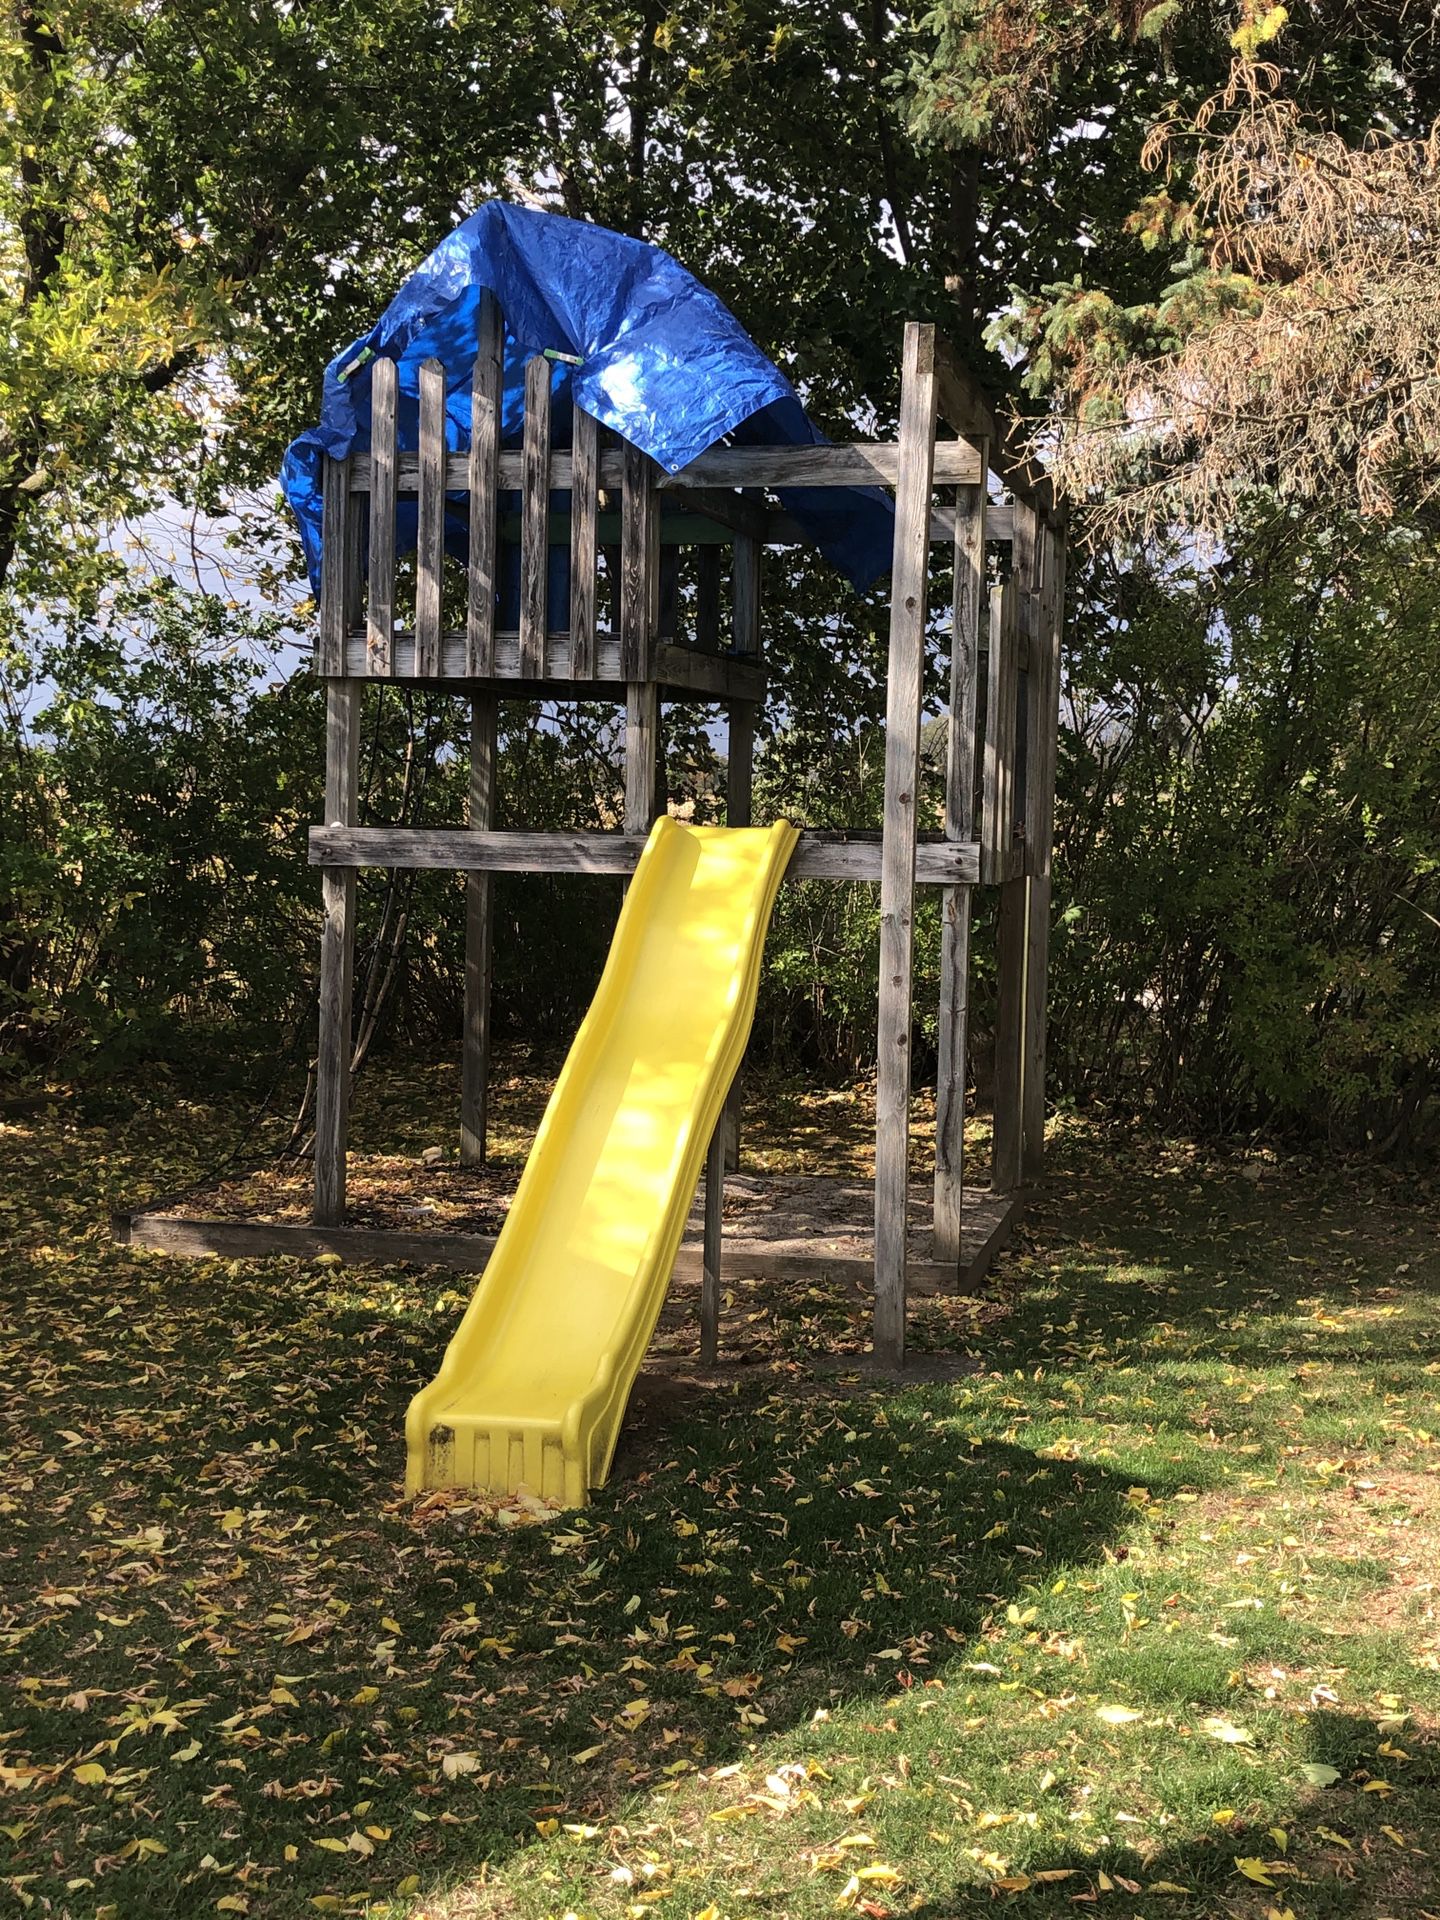 FREE LARGE PLAYSCAPE